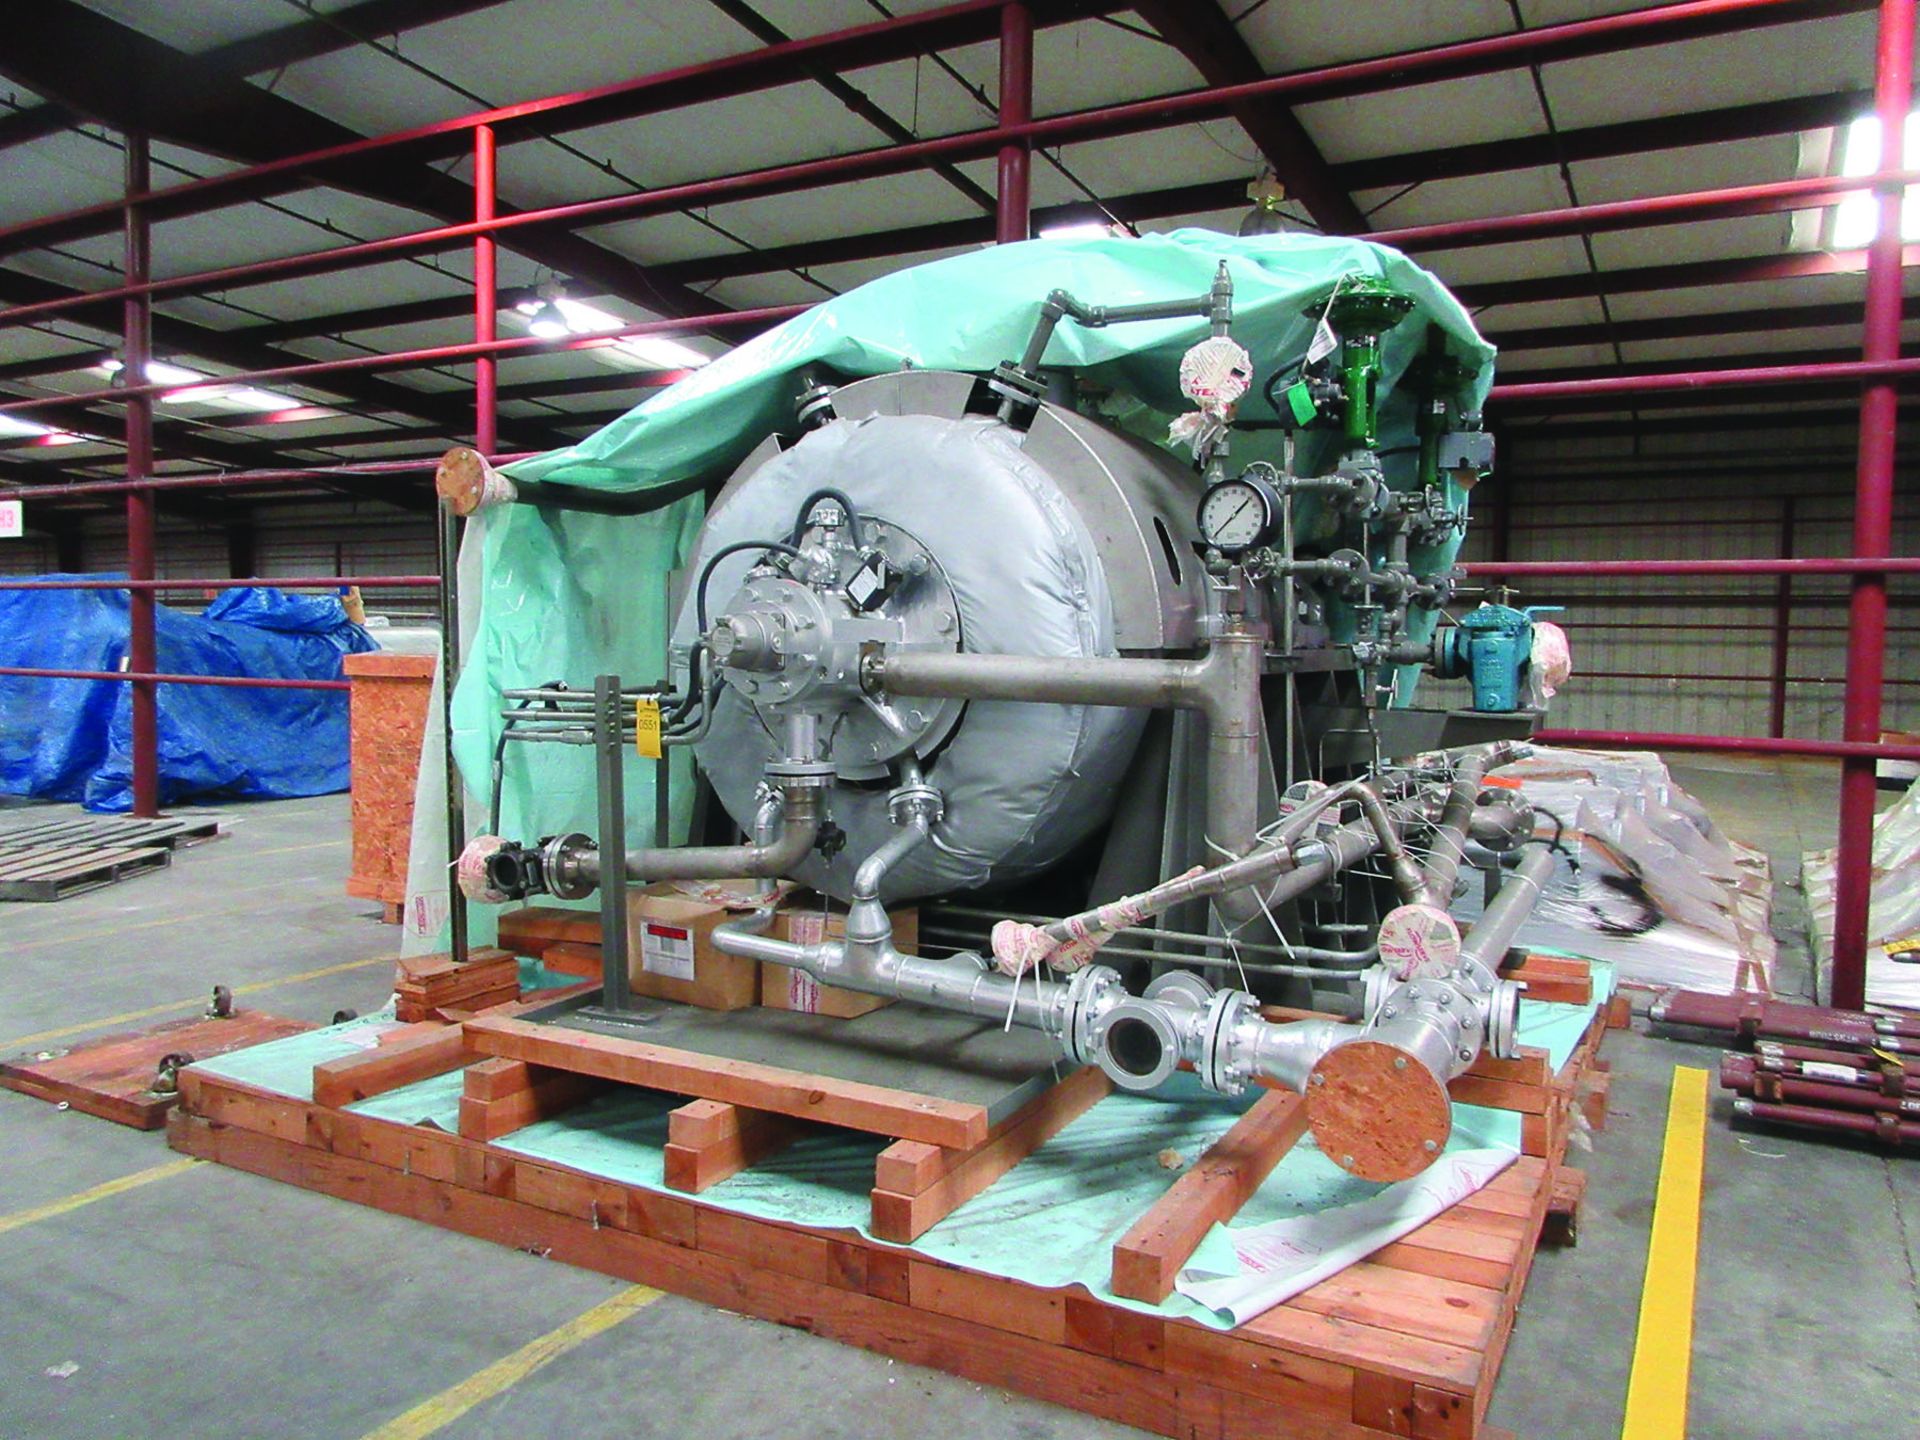 2008 FLOWSERVE BOILER FEED WATER PUMP, SIZE 80-CHTA-6, 5,500 RPM, CAP. 5,440 GPM, MAWT 375° F, MAWP: